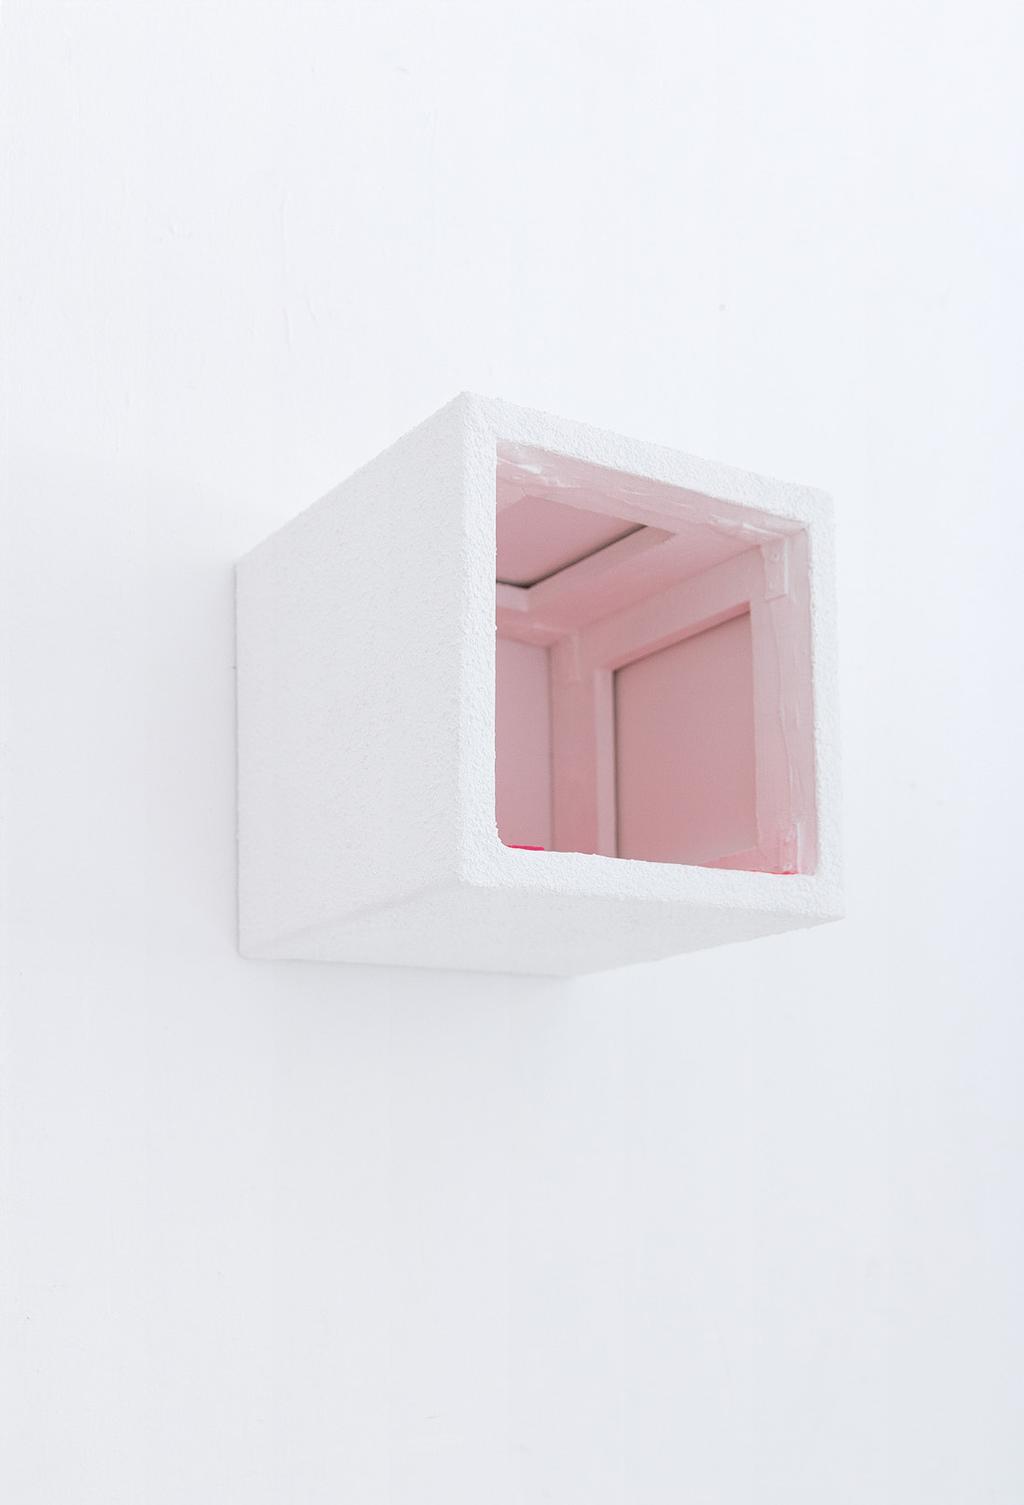 Untitled (Pink Cube) Acrylic on and on